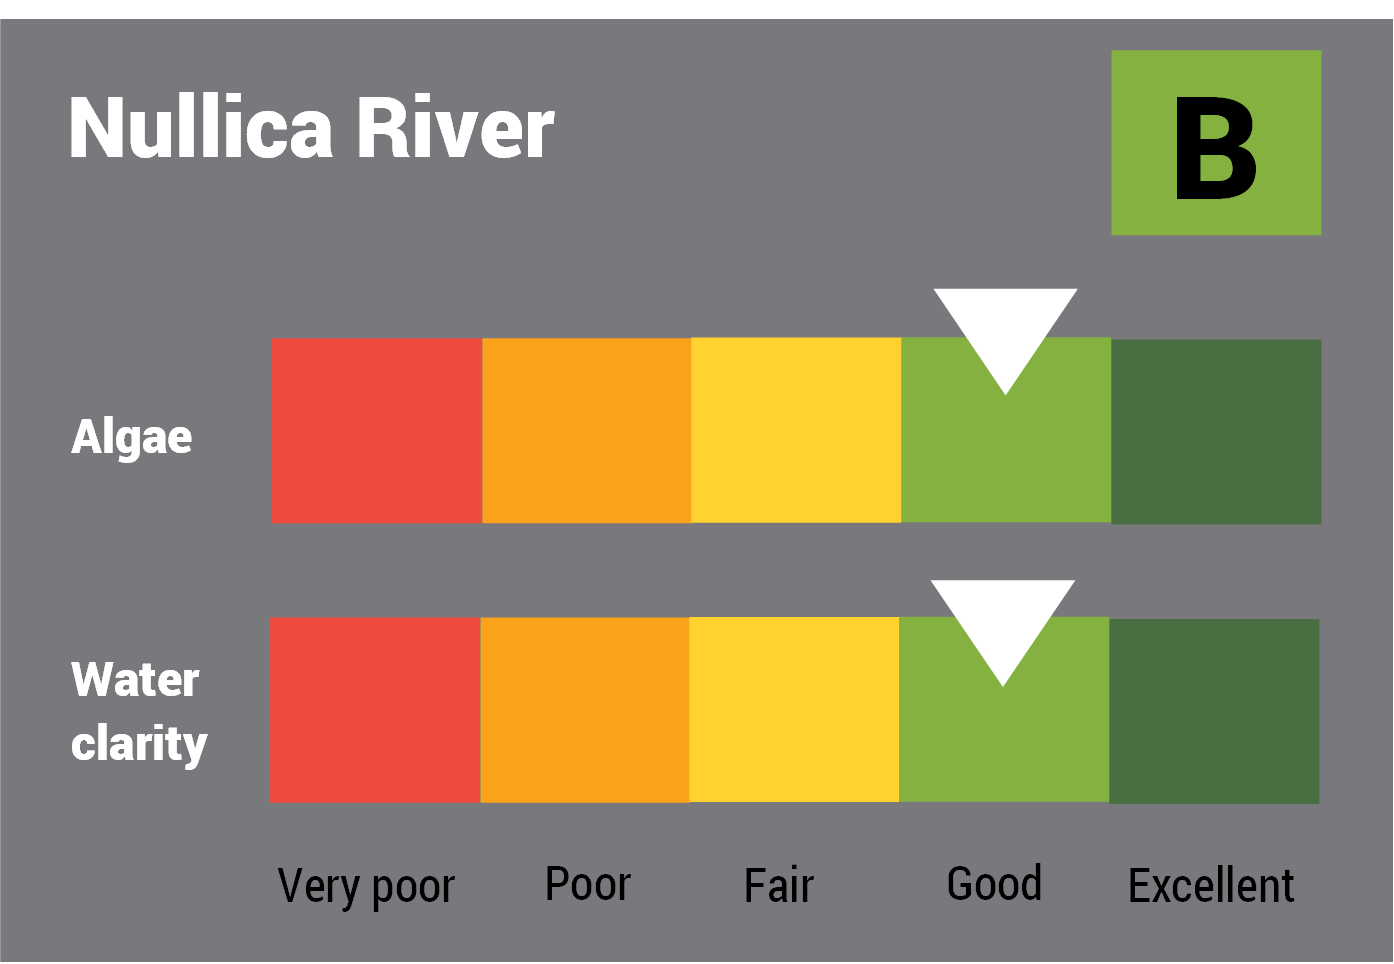 Nullica River water quality report card for algae and water clarity showing colour-coded ratings (red, orange, yellow, light green and dark green, which represent very poor, poor, fair, good and excellent, respectively). Algae is rated 'excellent' and water clarity is rated 'excellent' giving an overall rating of 'excellent' or 'A'.